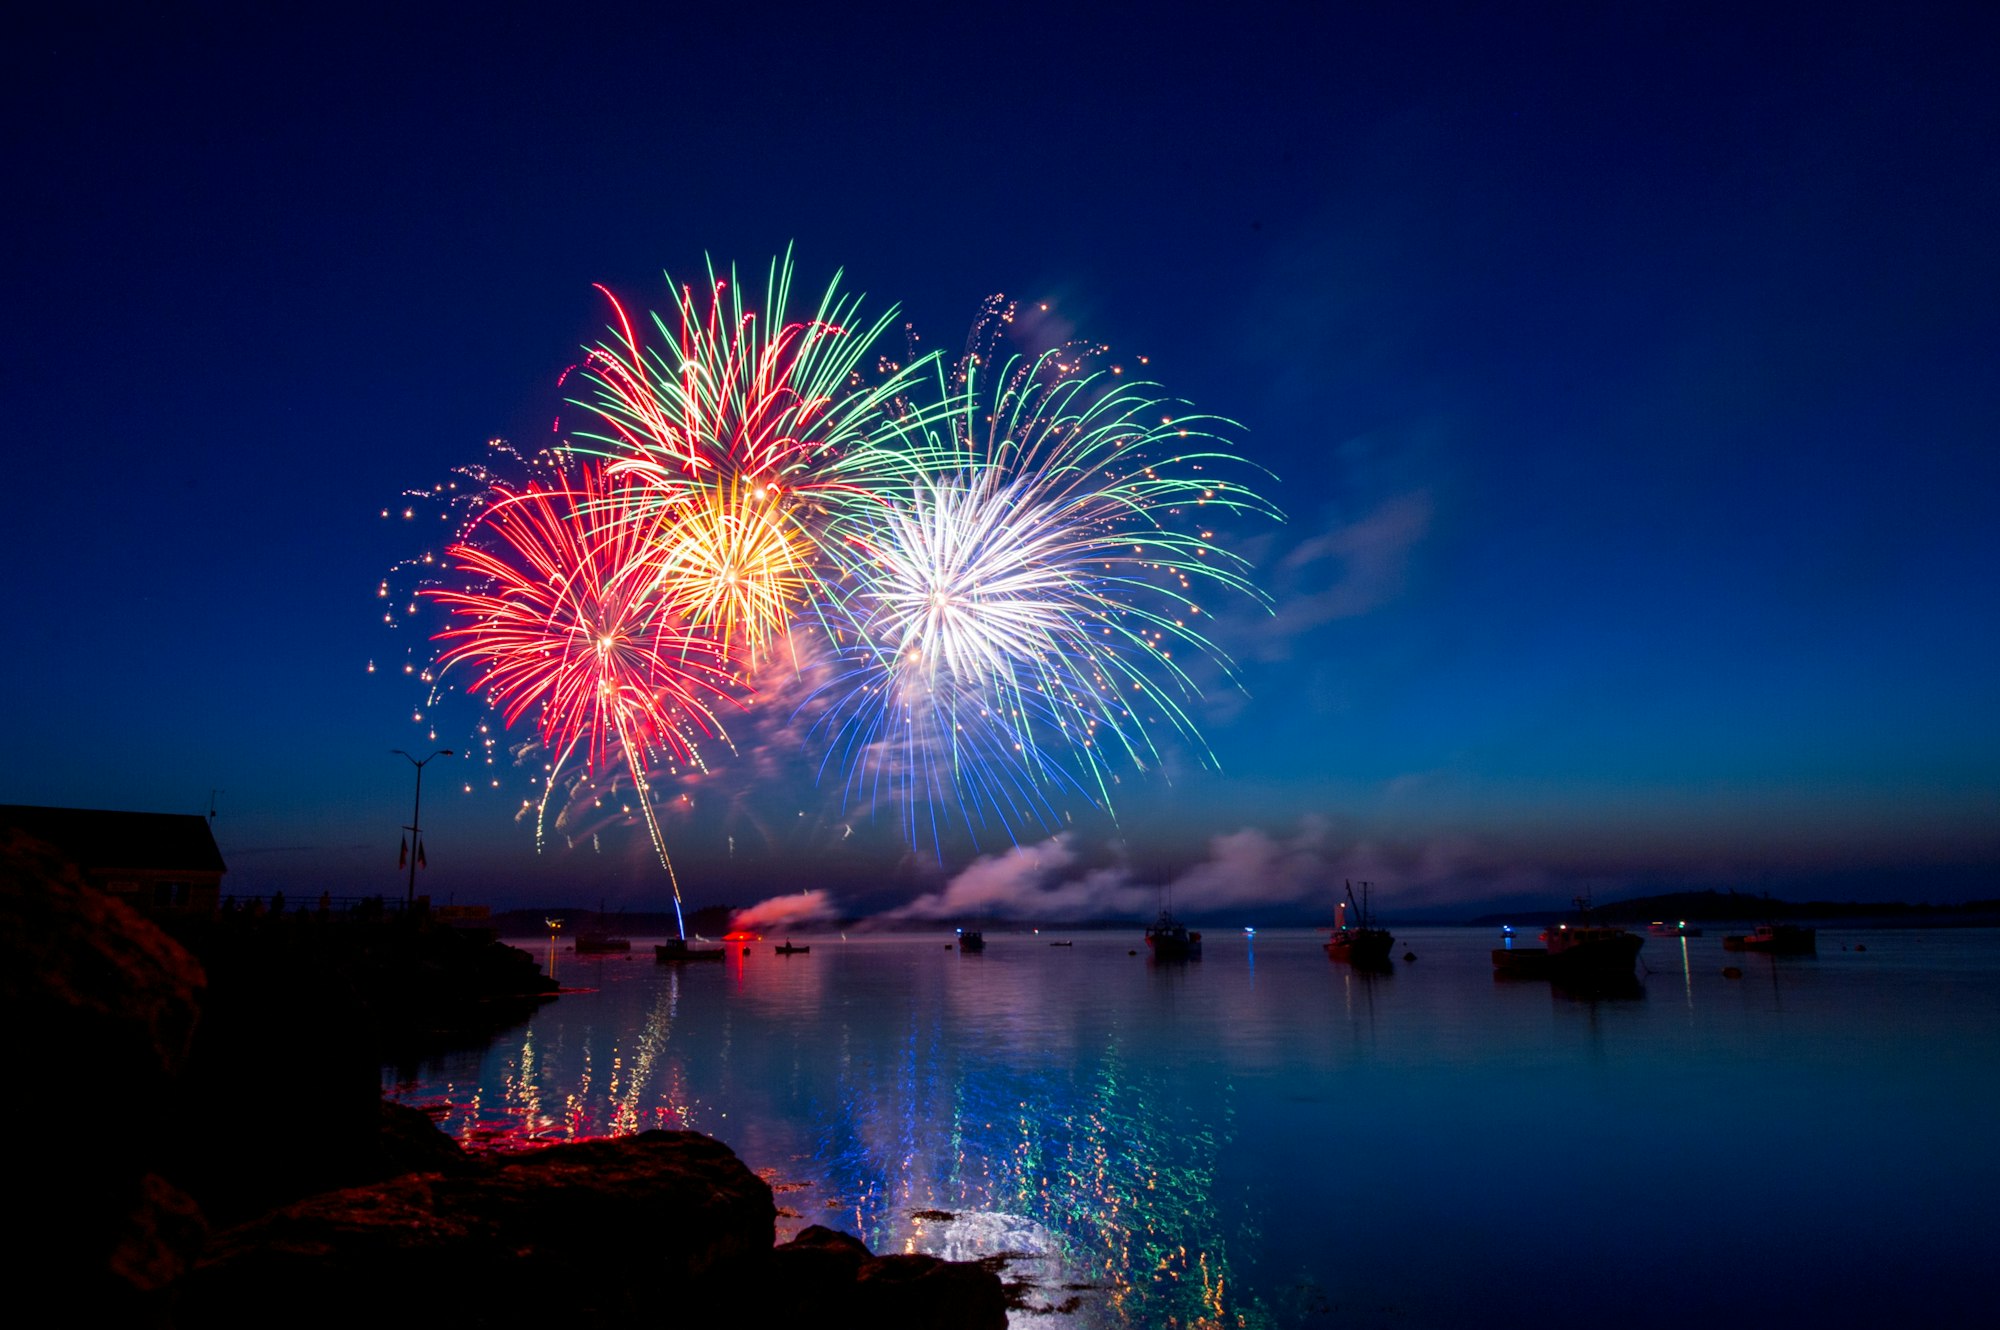 A fireworks display in the harbor of Lubec Maine.  The dusk sky, water and boats provided a beautiful setting for the colorful show.